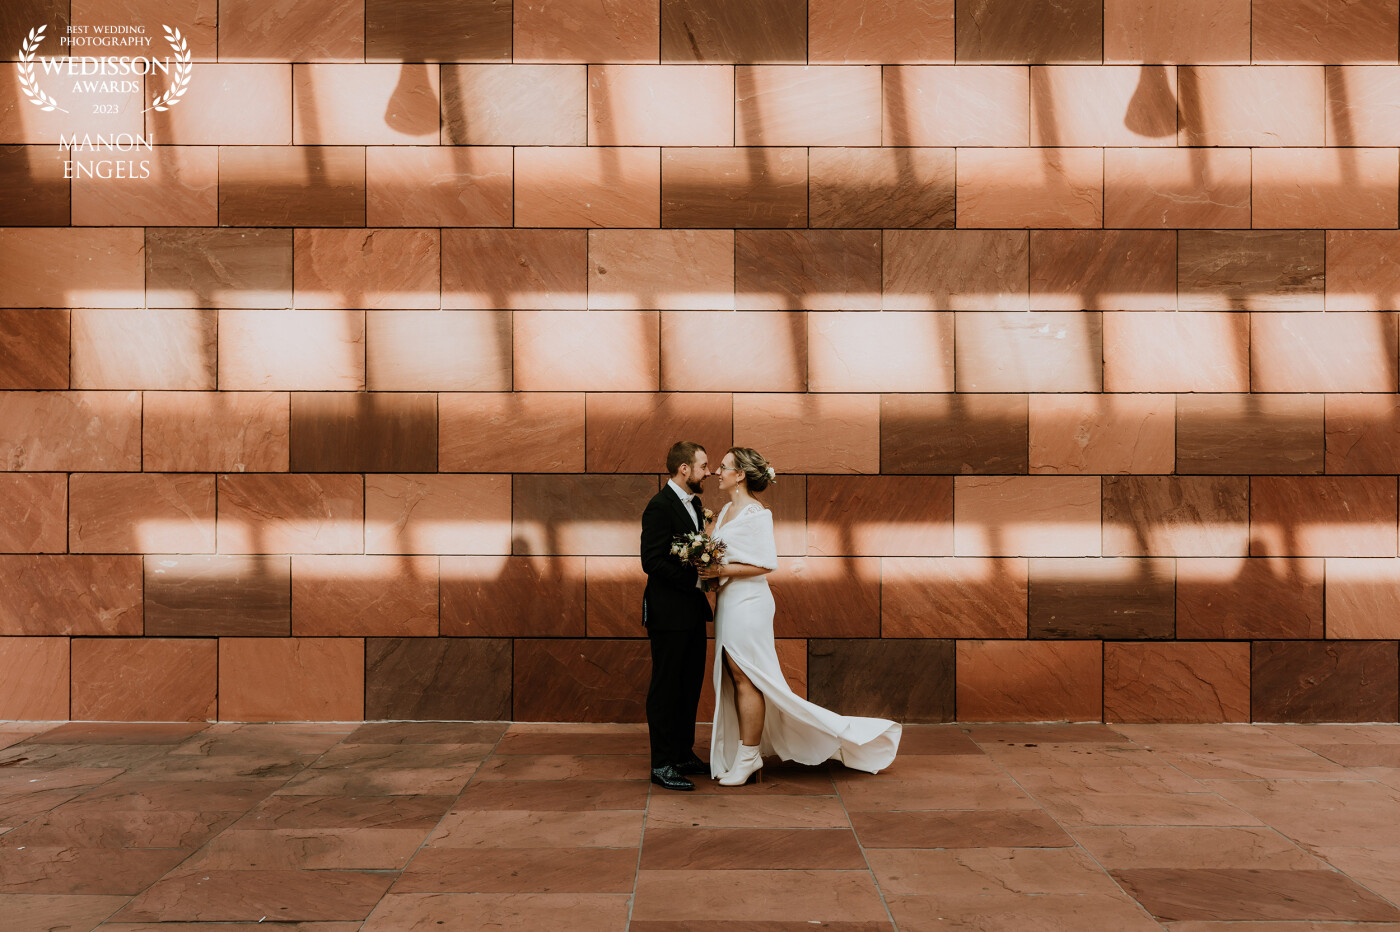 Liese & Stefan wanted something different for their wedding photographs. So we went for an urban vibe. <br />
We walked around at the well known 'Eilandje' in Antwerp when I spotted this wall and beautiful light.